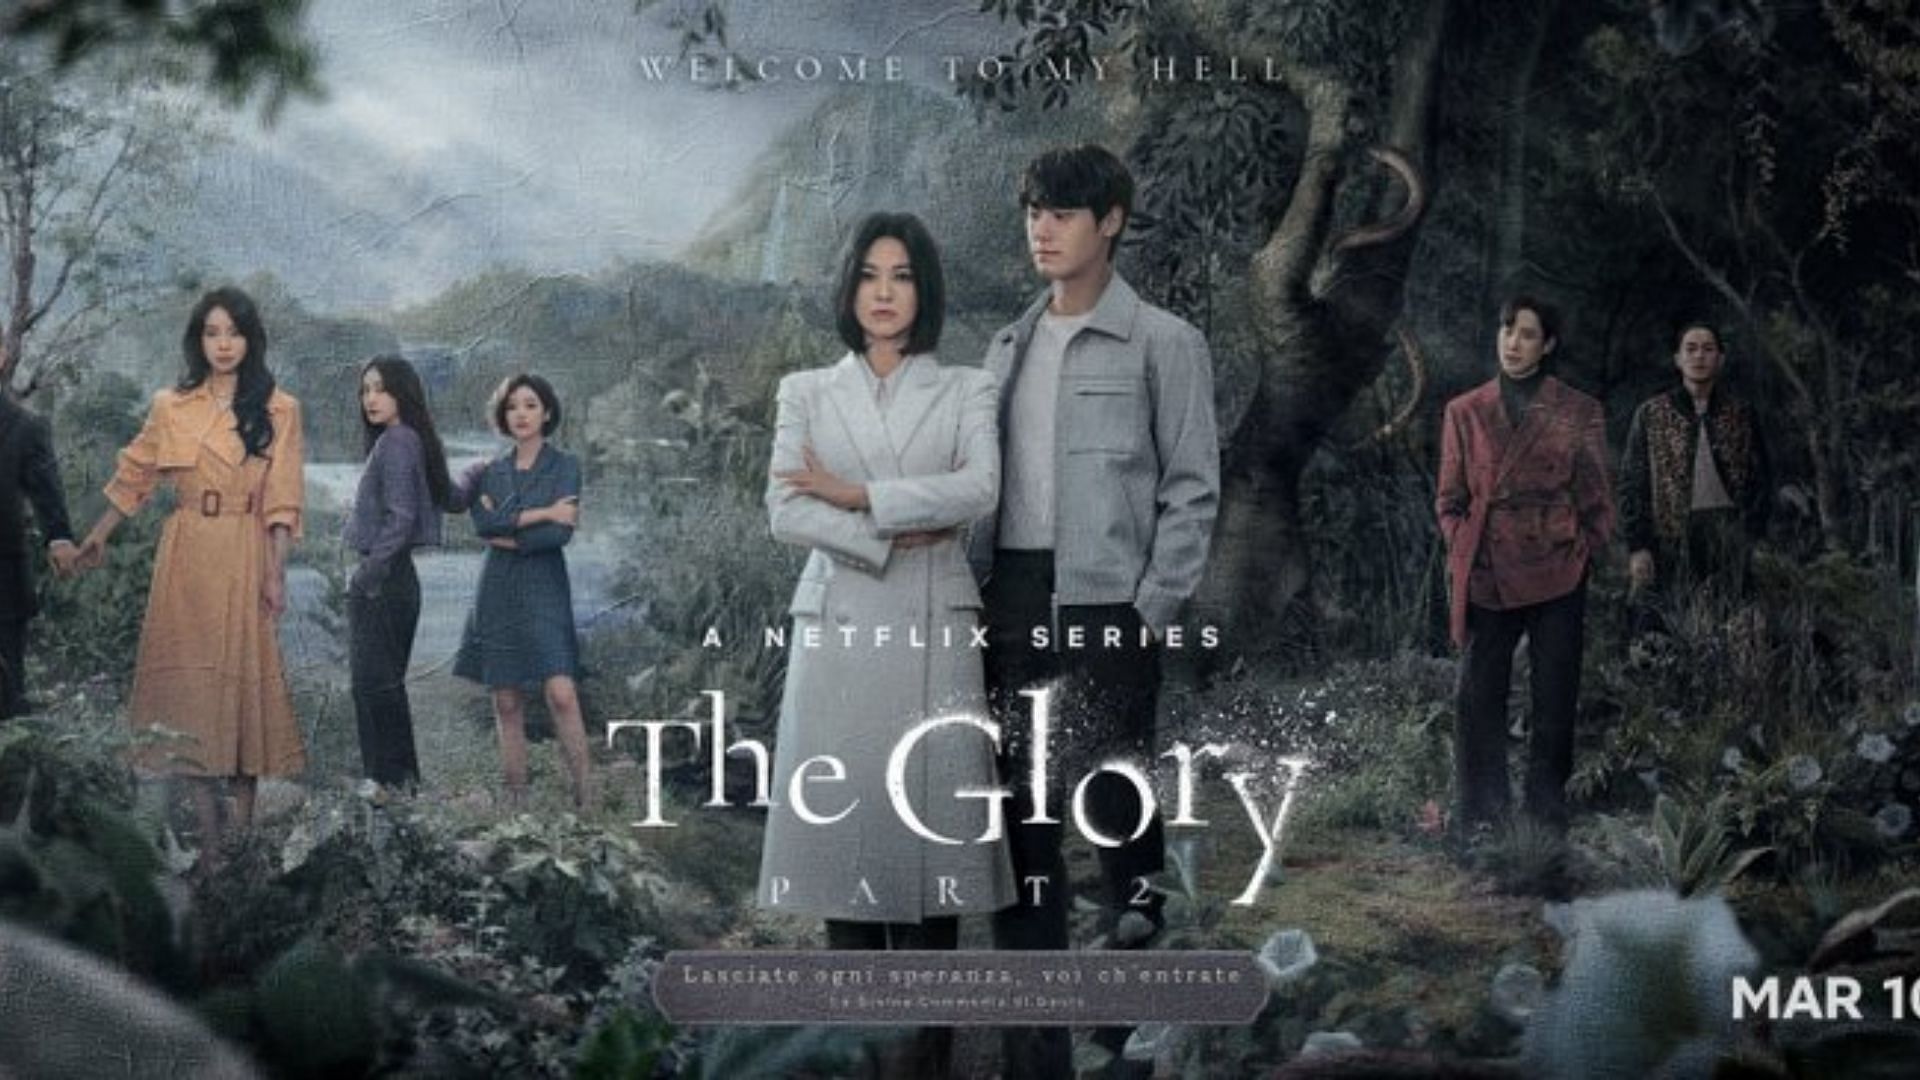 The official poster for the second part of The Glory (Image via Netflix)